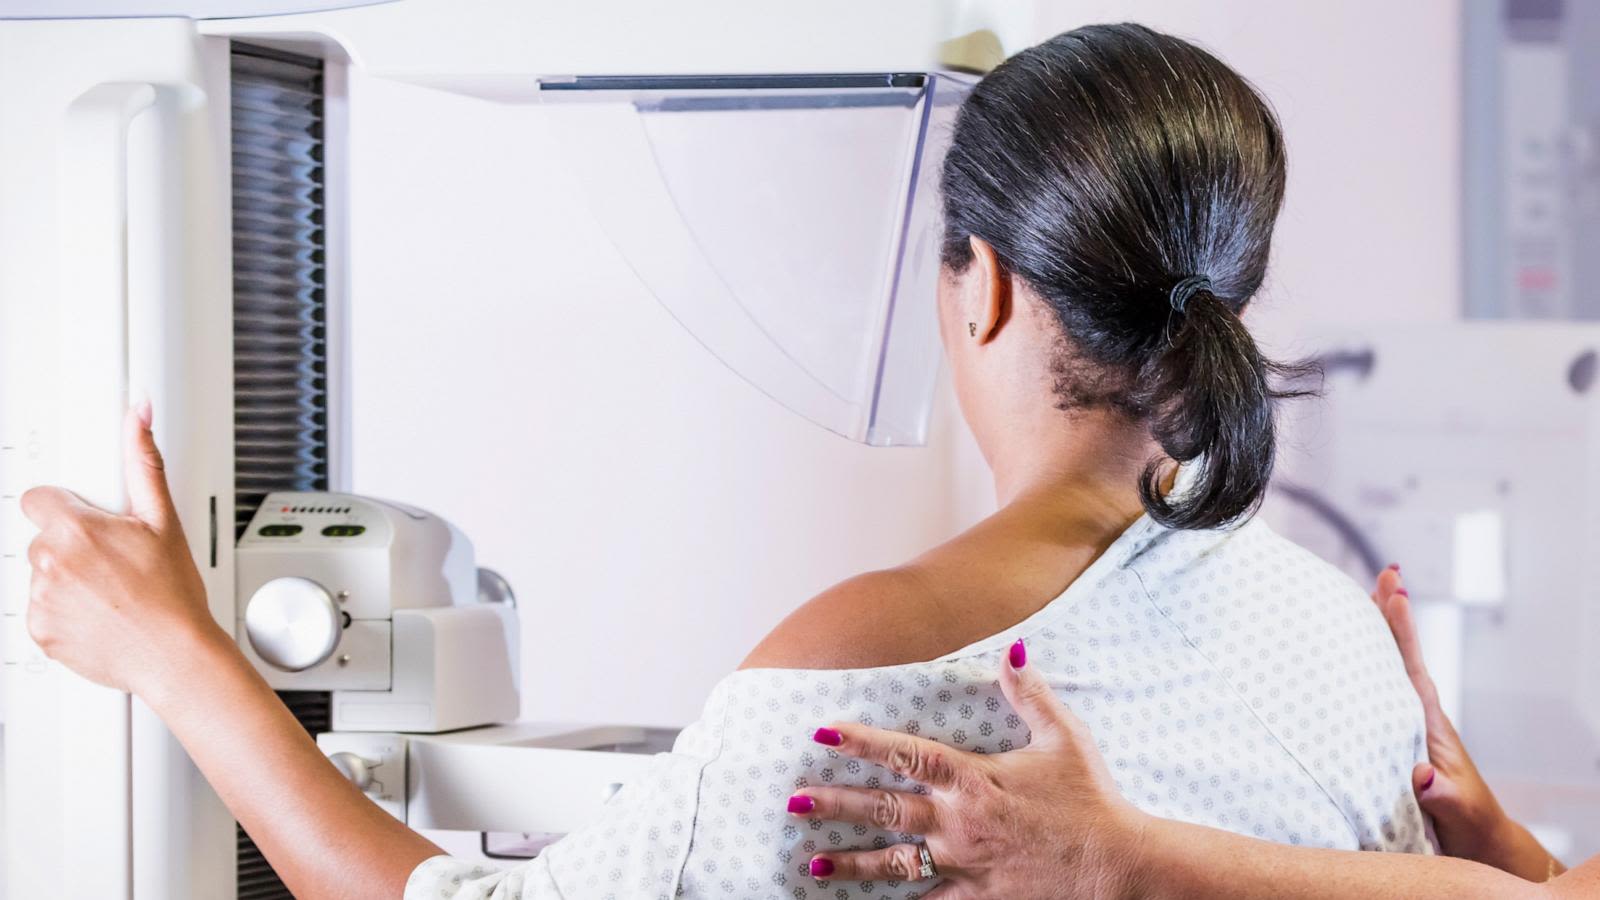 Major disparities exist in women of color's access to breast cancer care, report finds